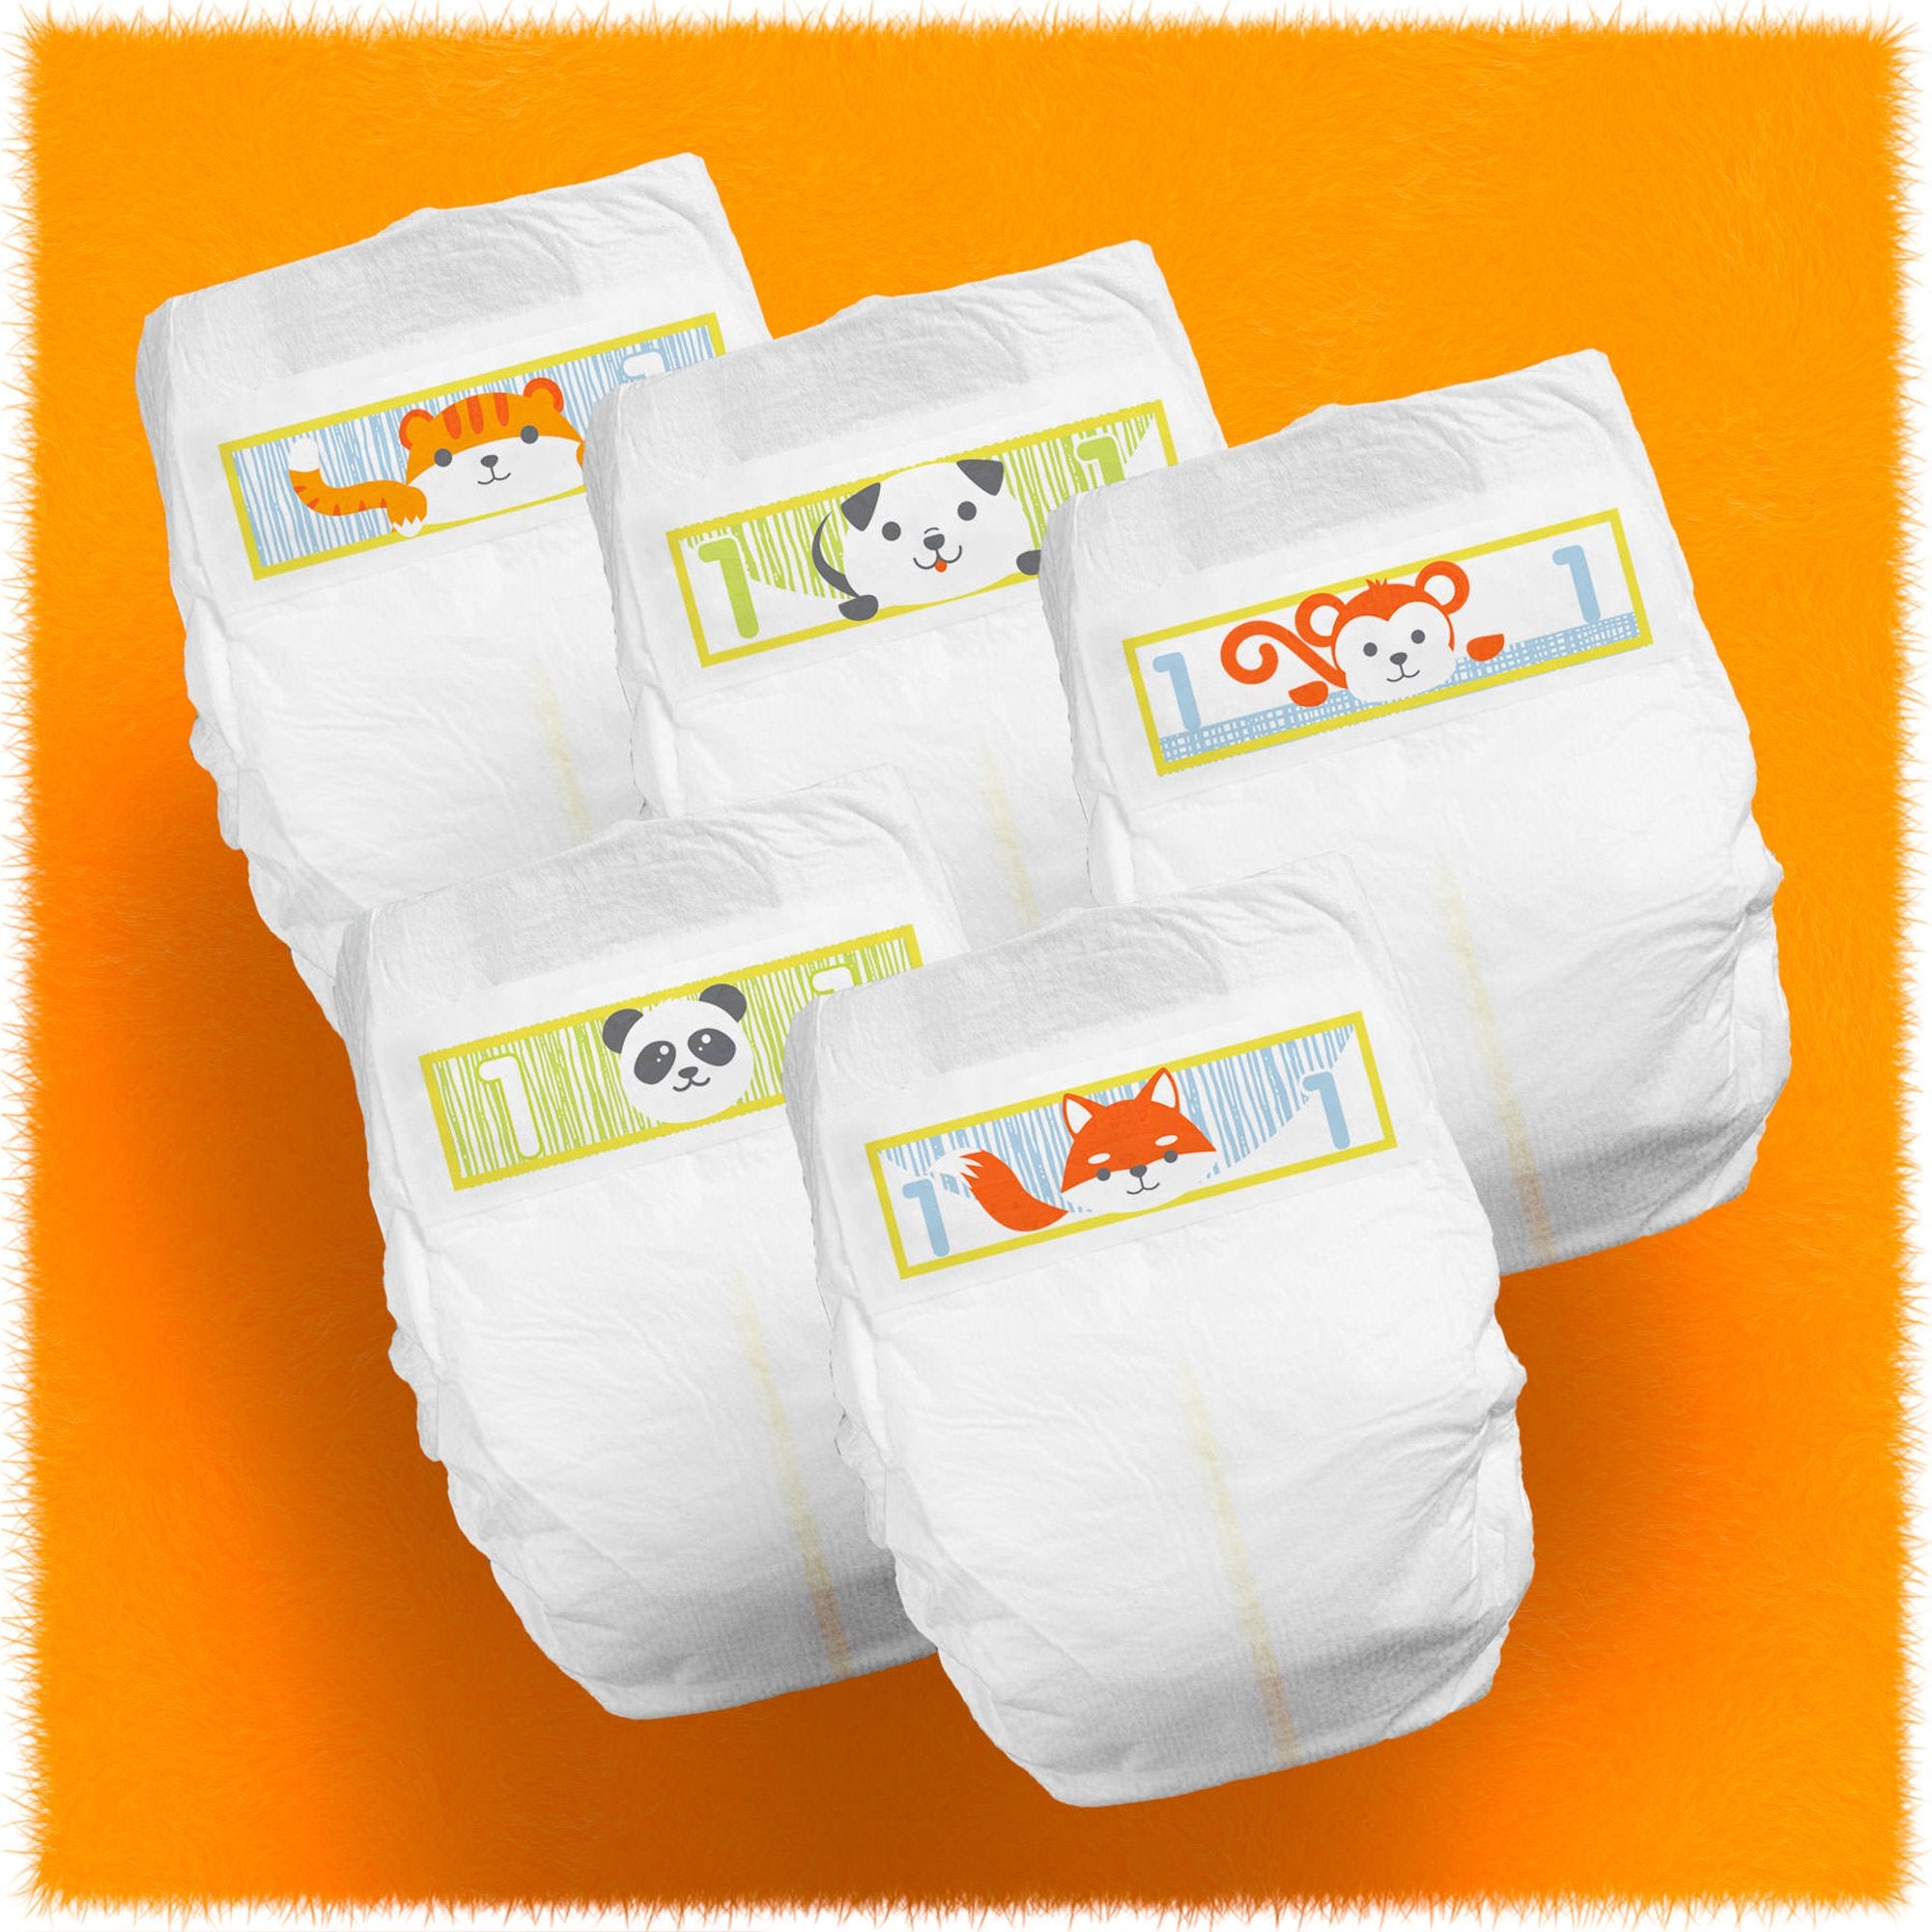 Unisex Baby Diaper Cuties Size 1 Disposable Heavy Absorbency